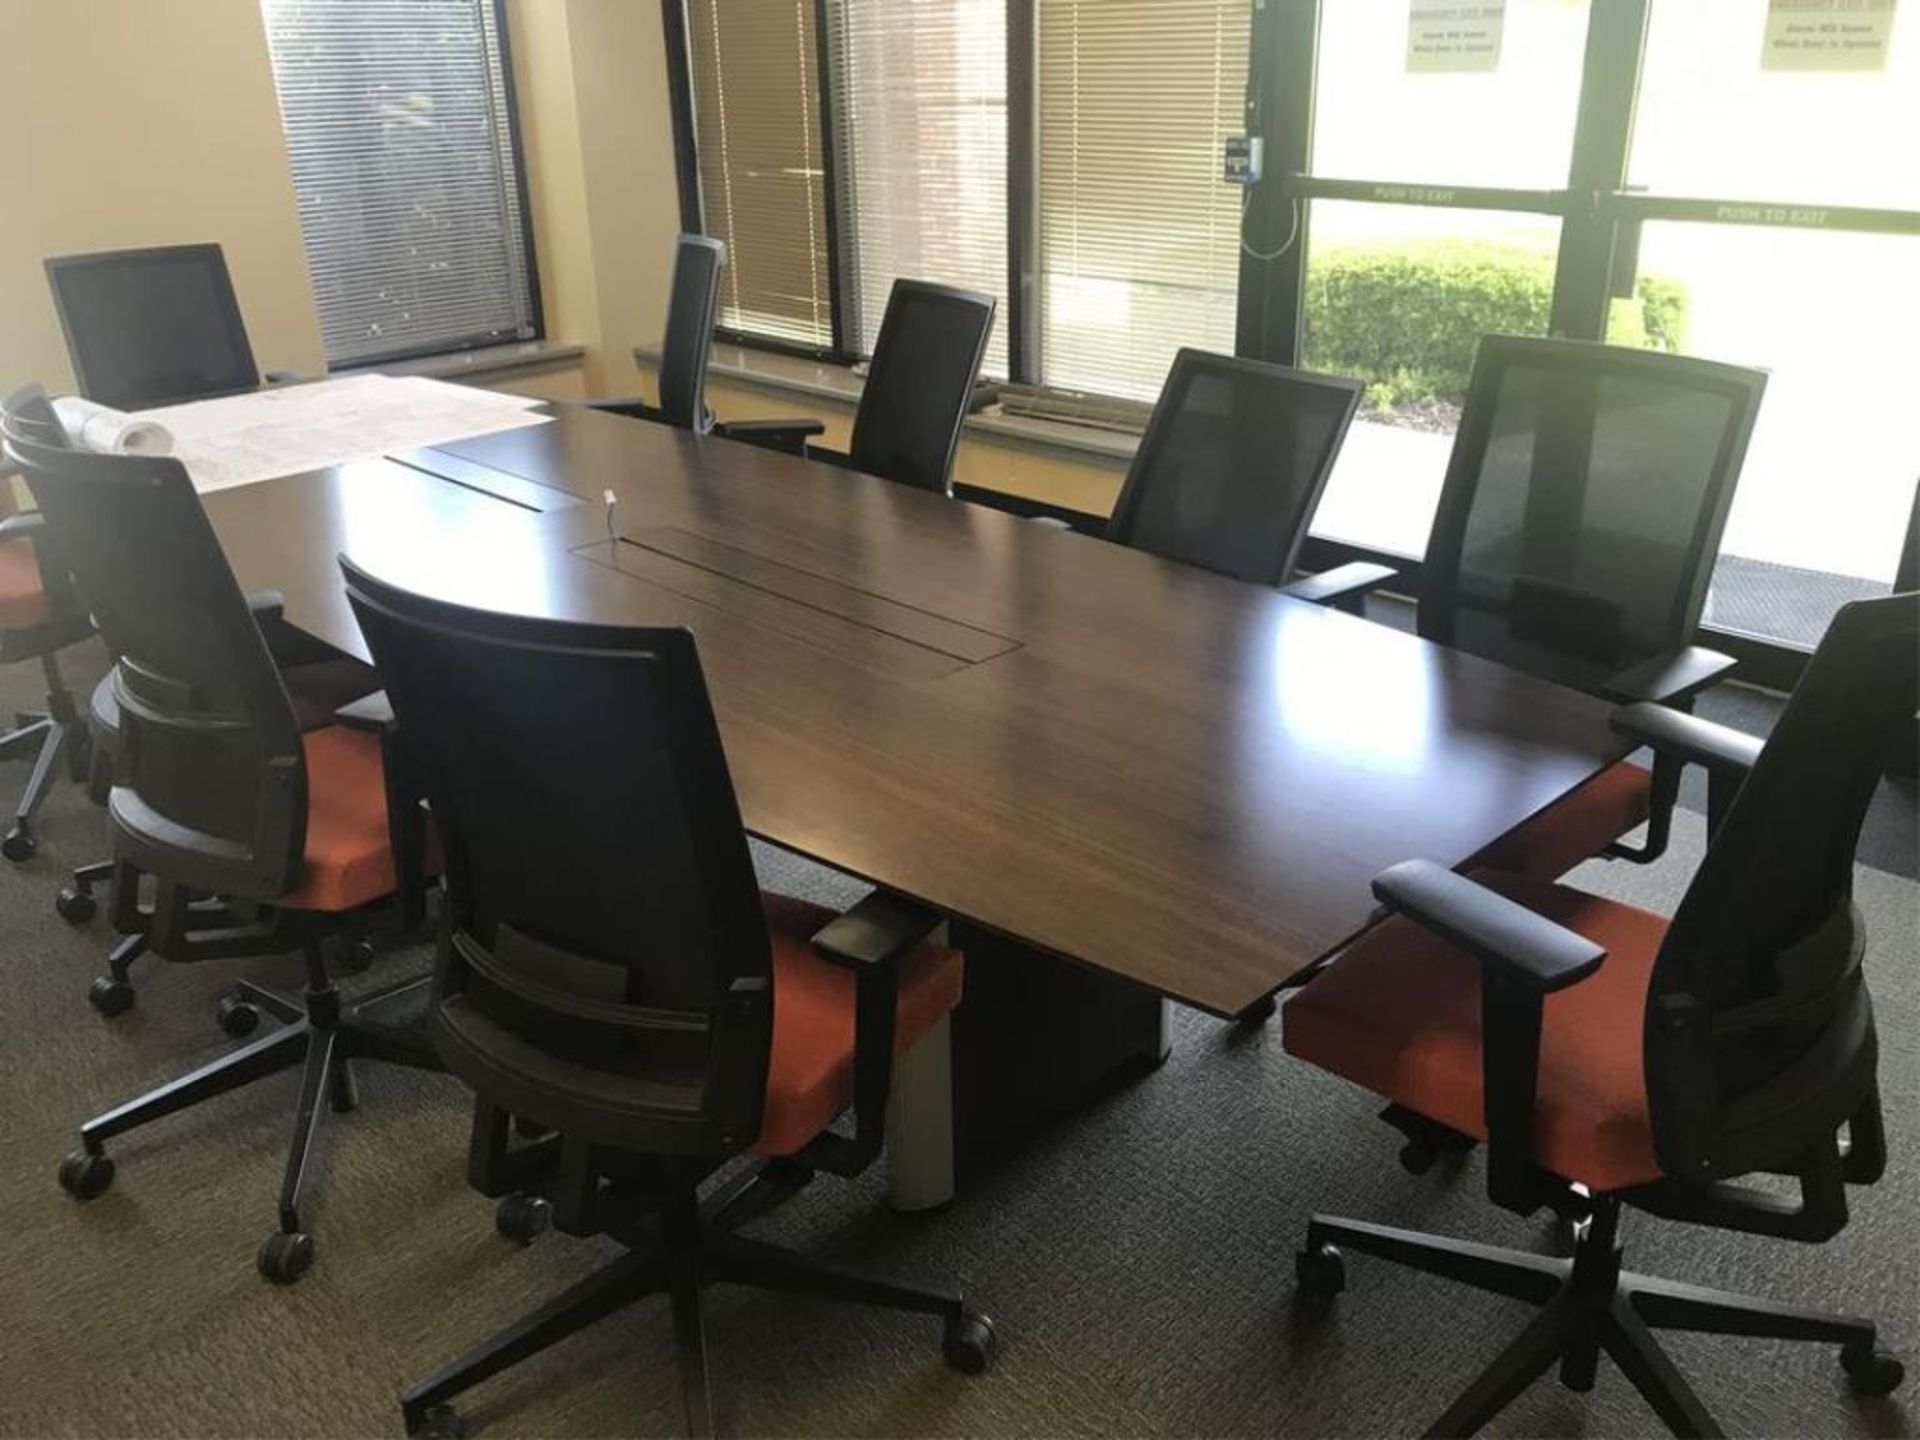 Conference Room Furniture - Image 3 of 6